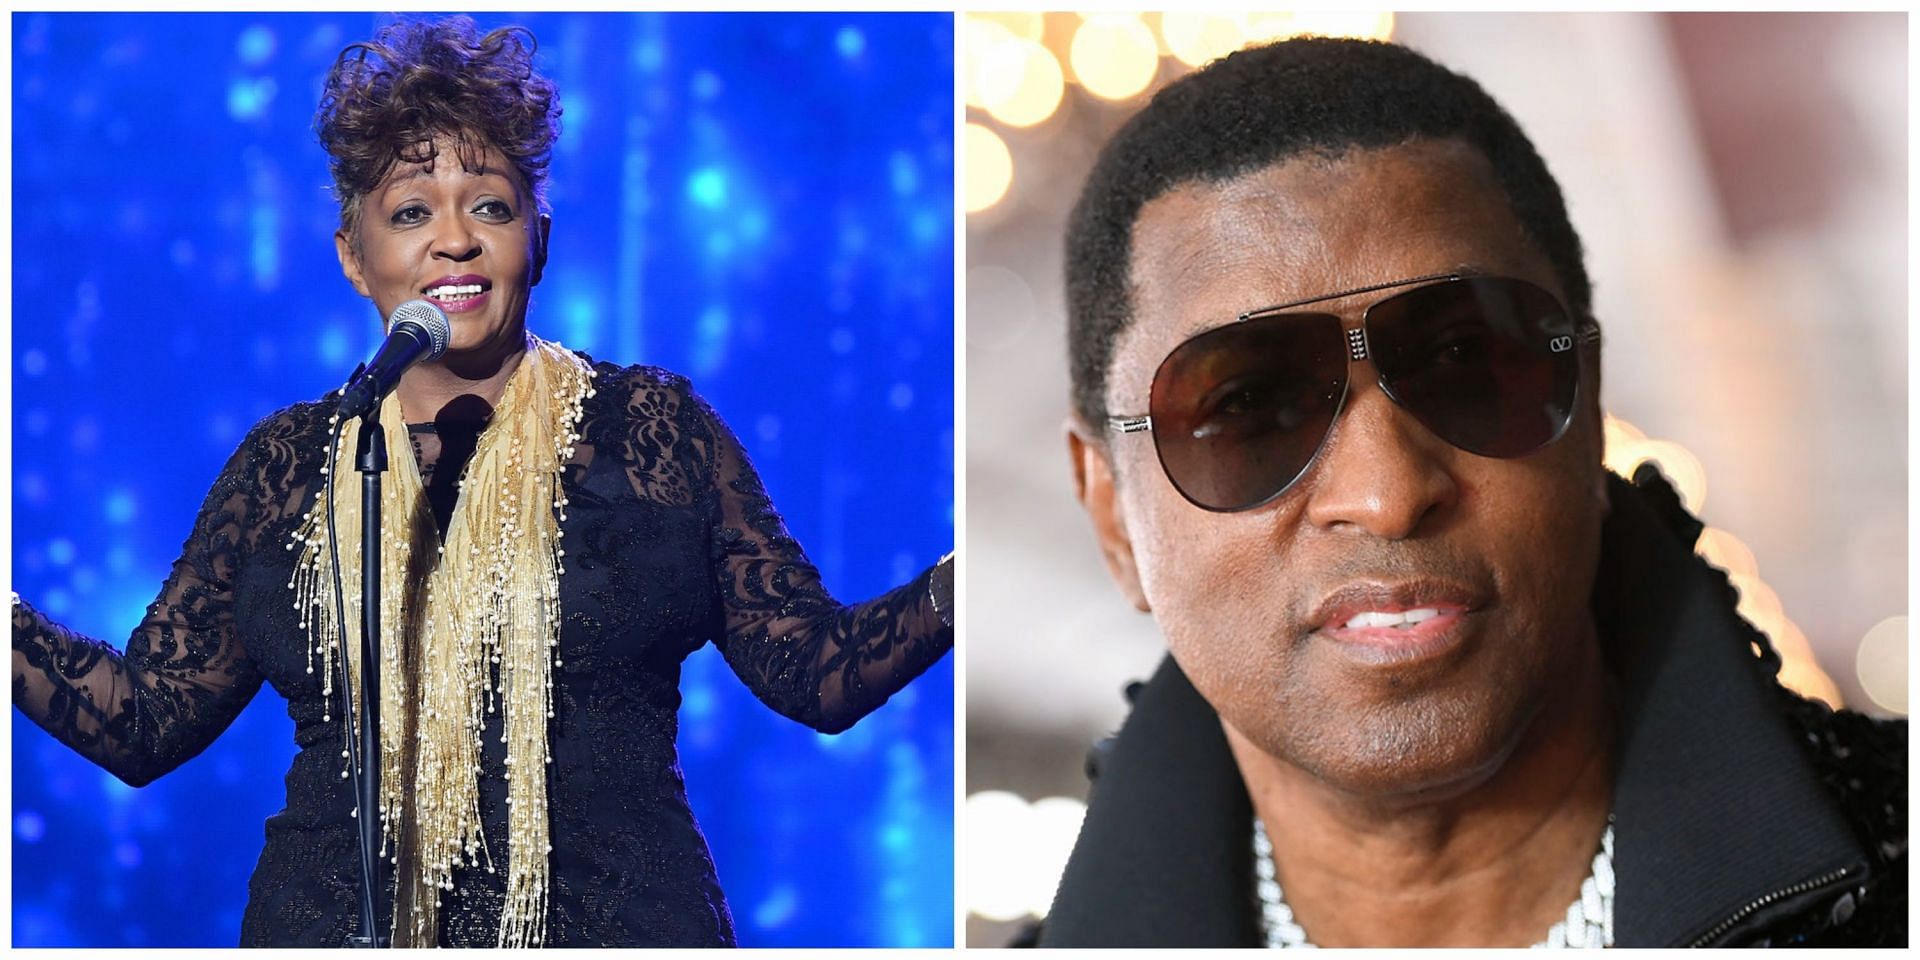 Social media users left agitated after Anita Baker made the audience wait for 2 hours at Newark concert. (image via Getty Images)